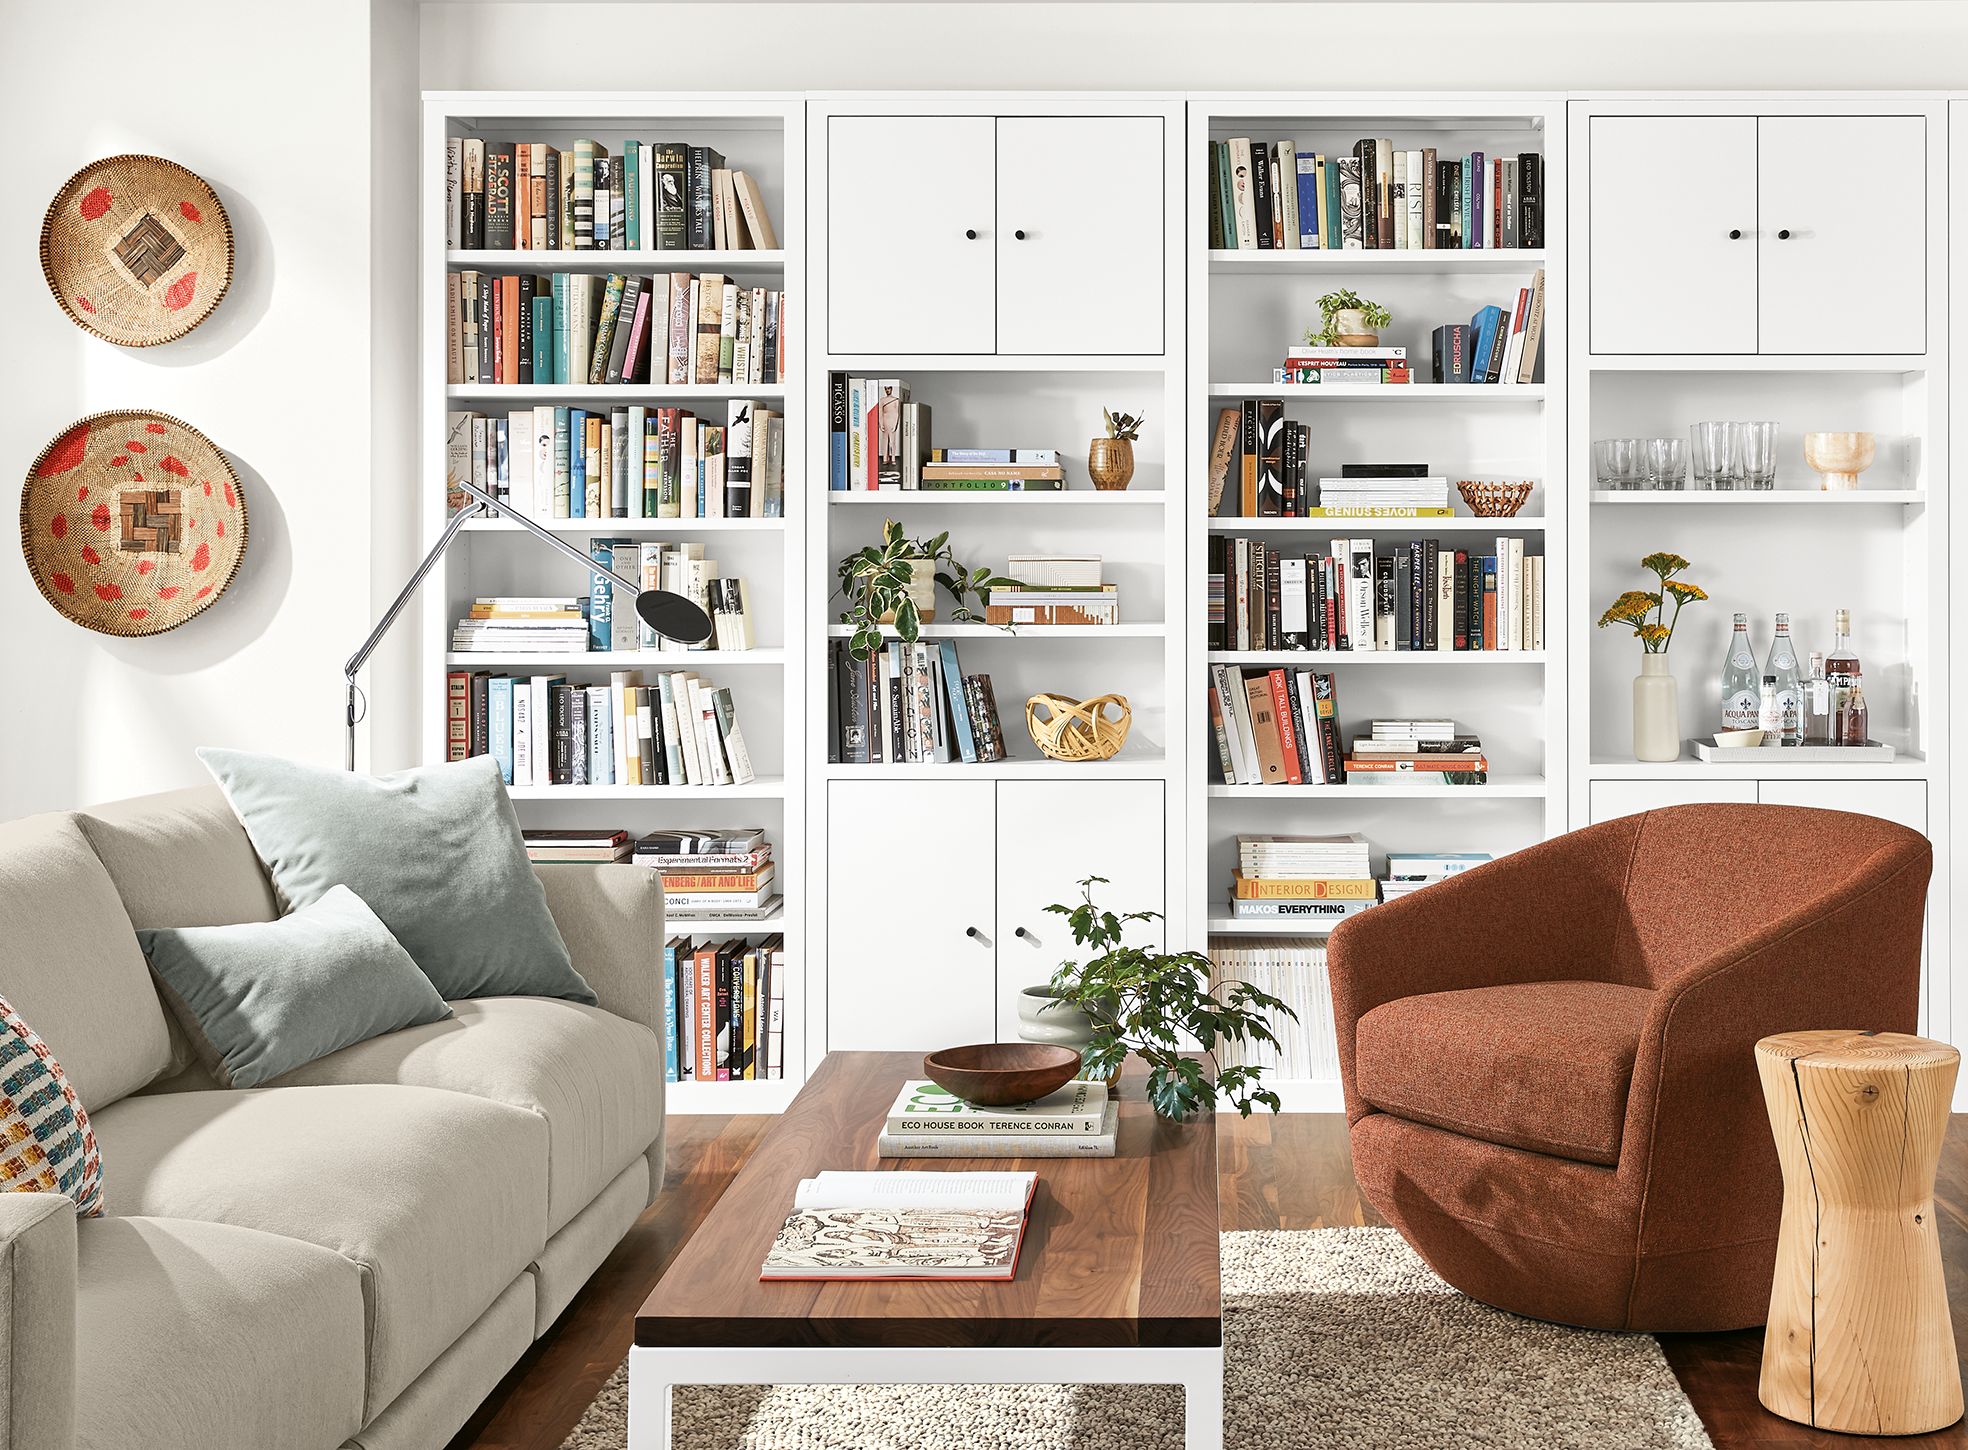 Detail of Woodwind bookcases in white in living room with Gibbs chair and Clemens sofa.